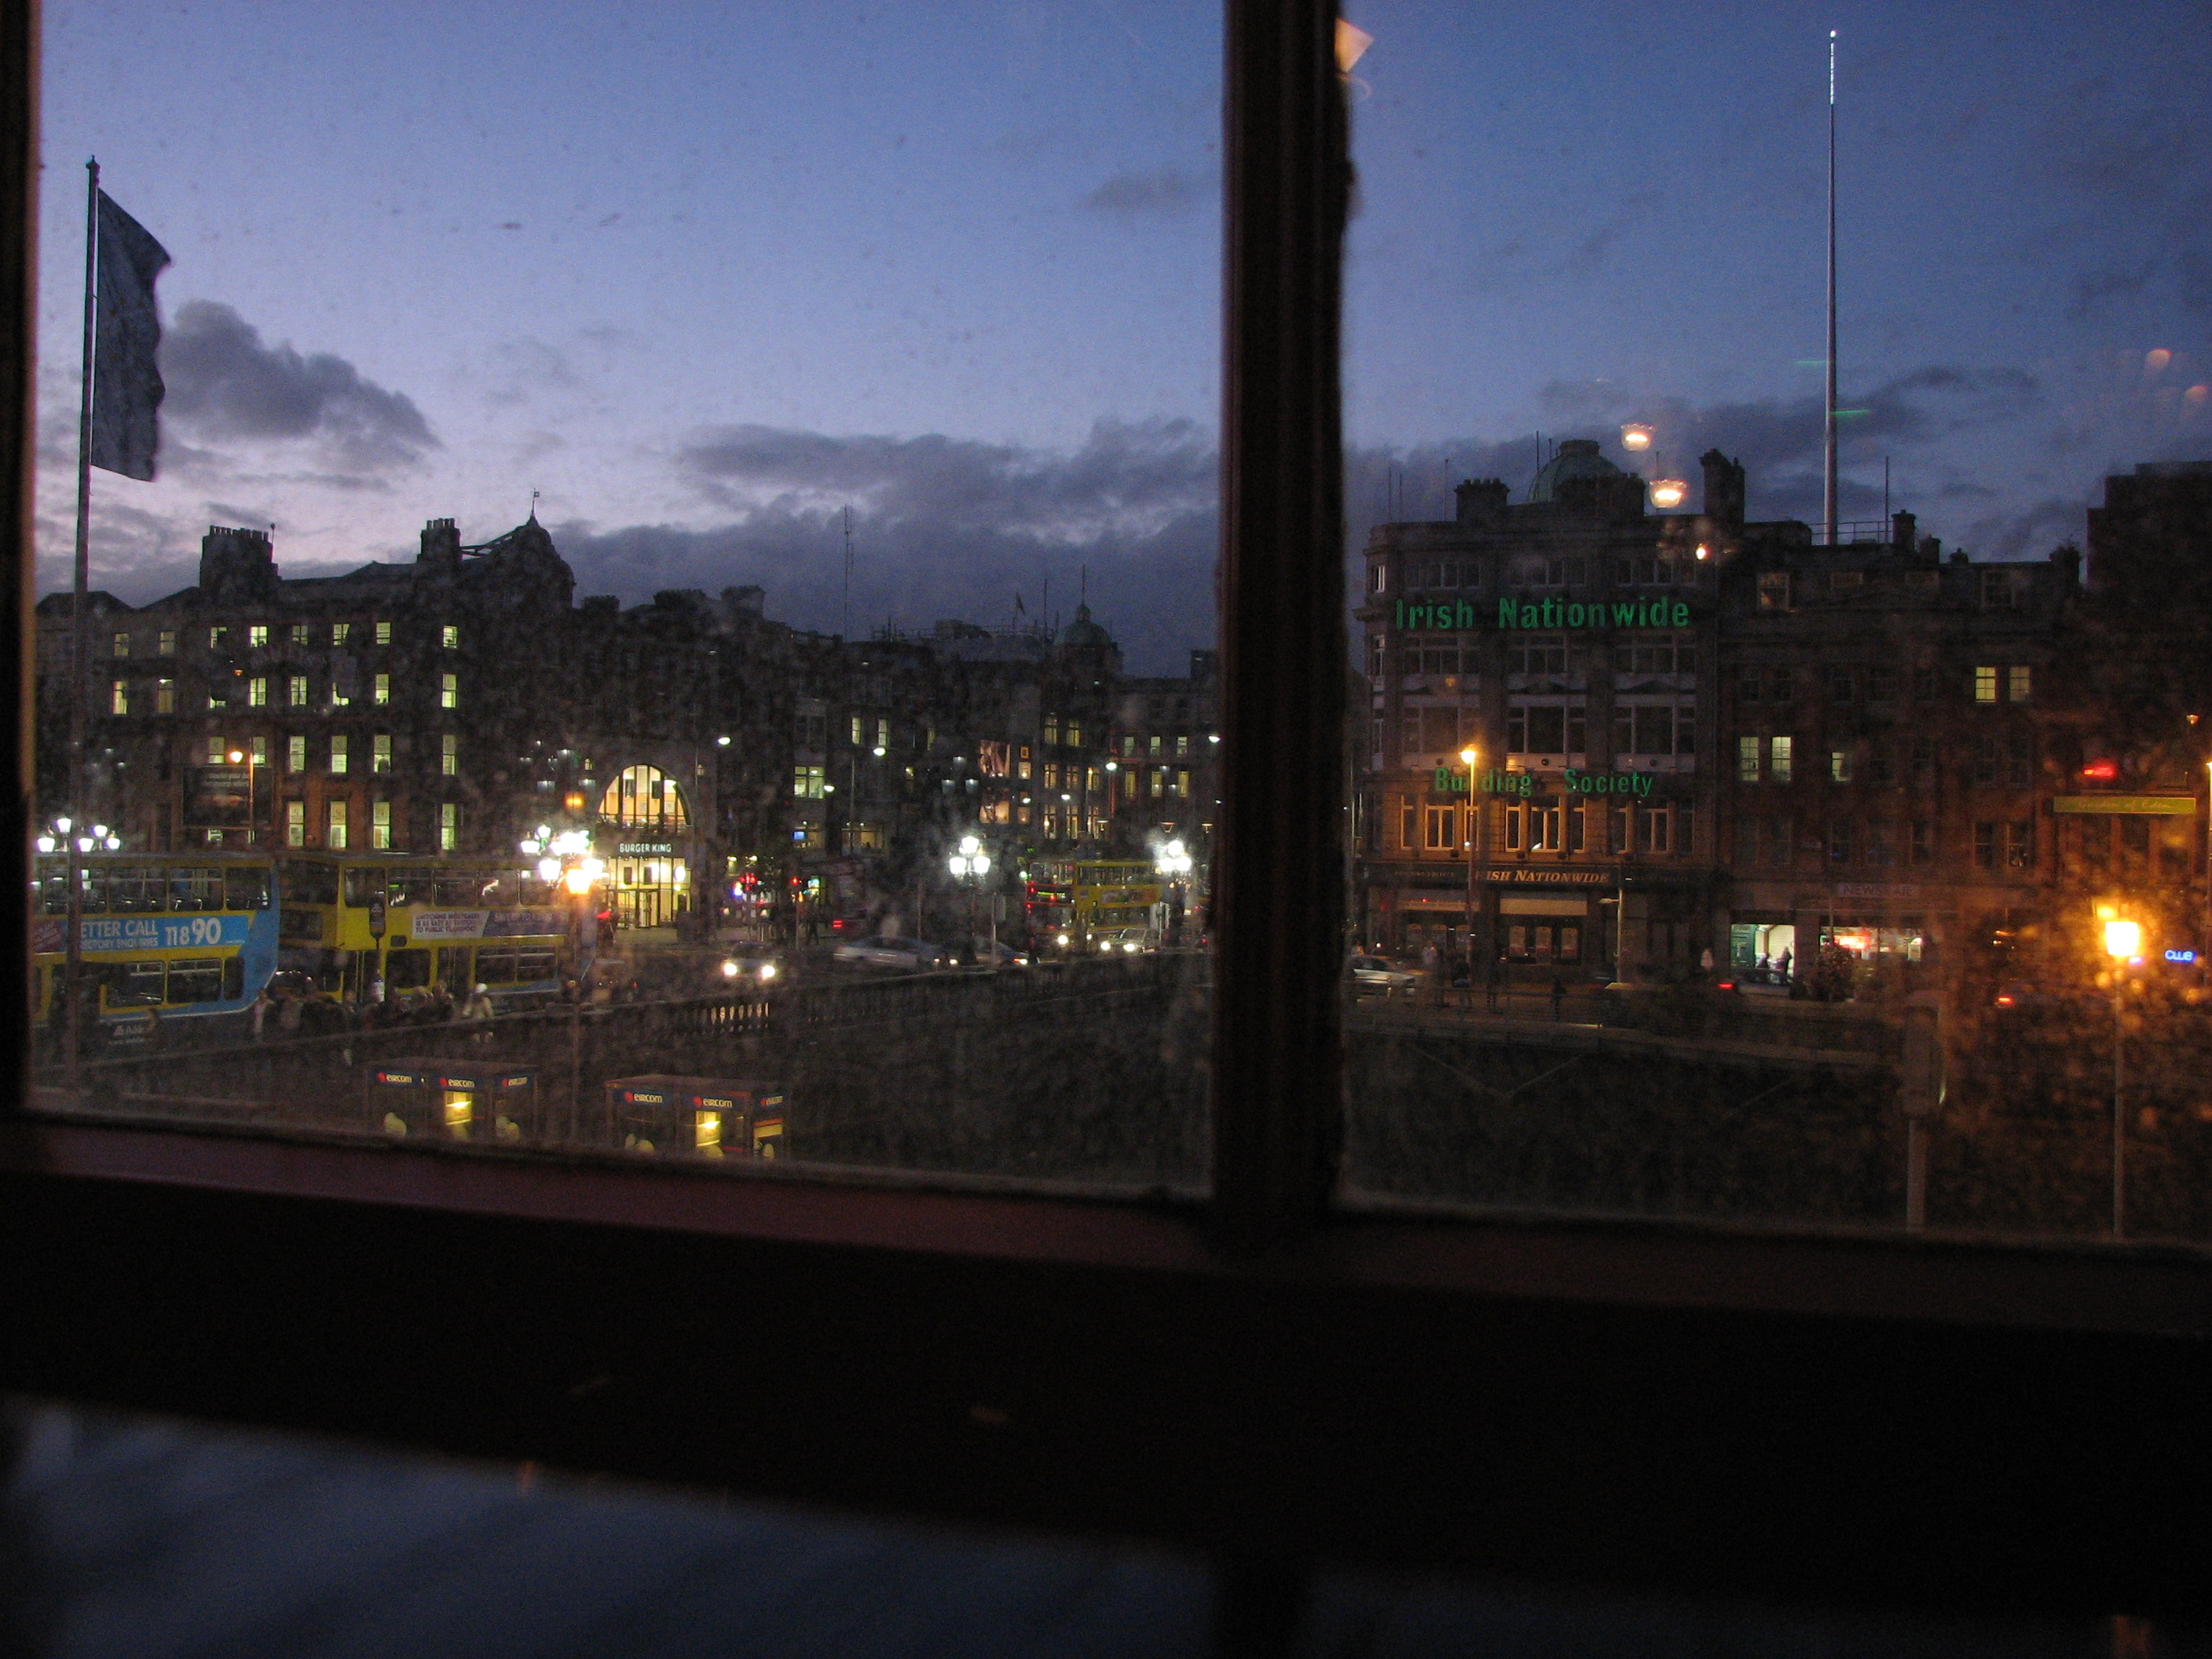 Rainy View from Messrs McGuire, City Centre, Dublin